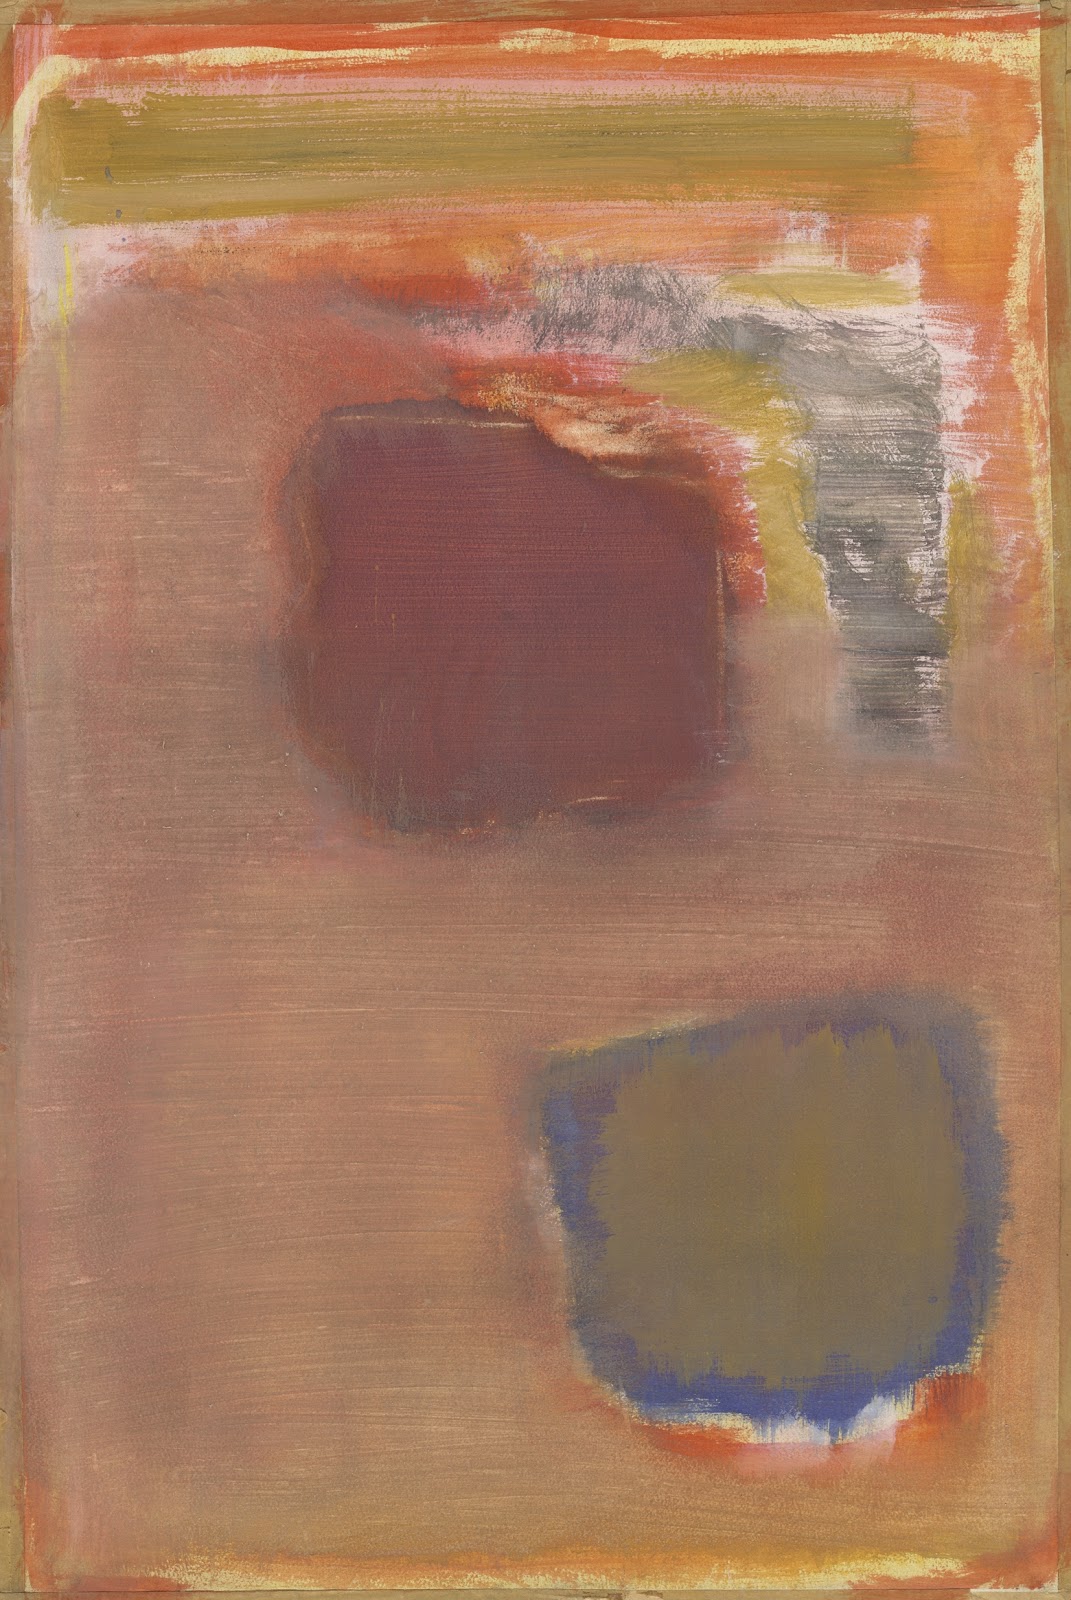 The Enduring Relevance of Rothko's Magnificent Abstract